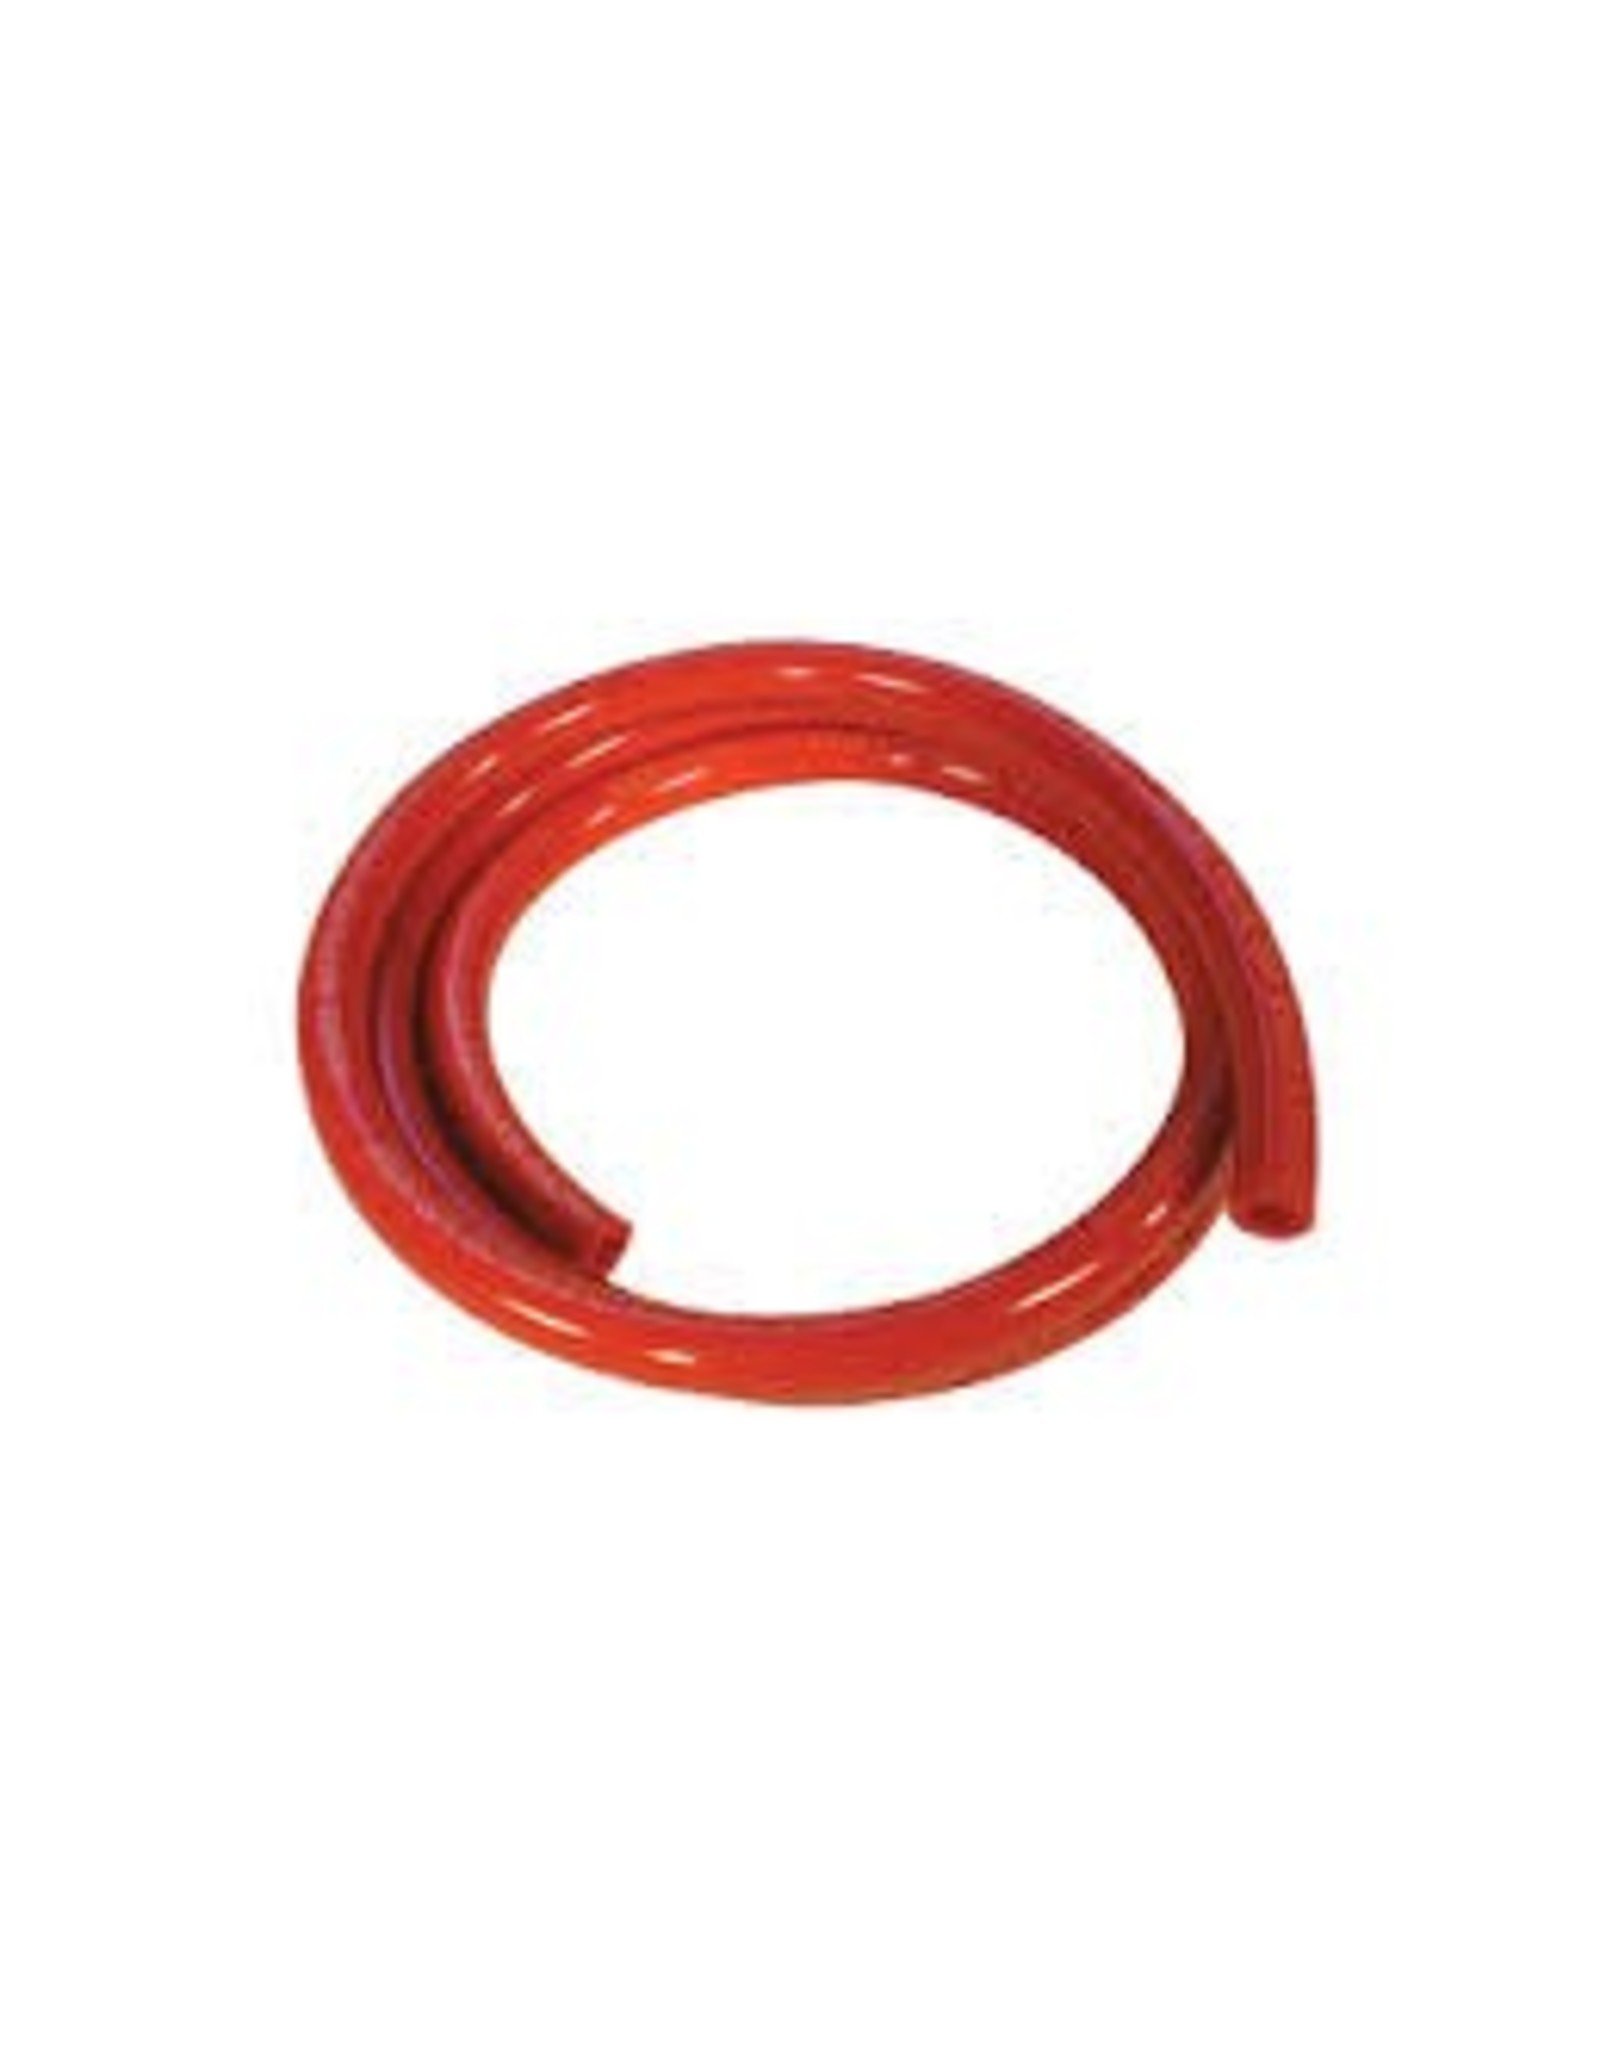 RED PVC GAS 5/16 INCH